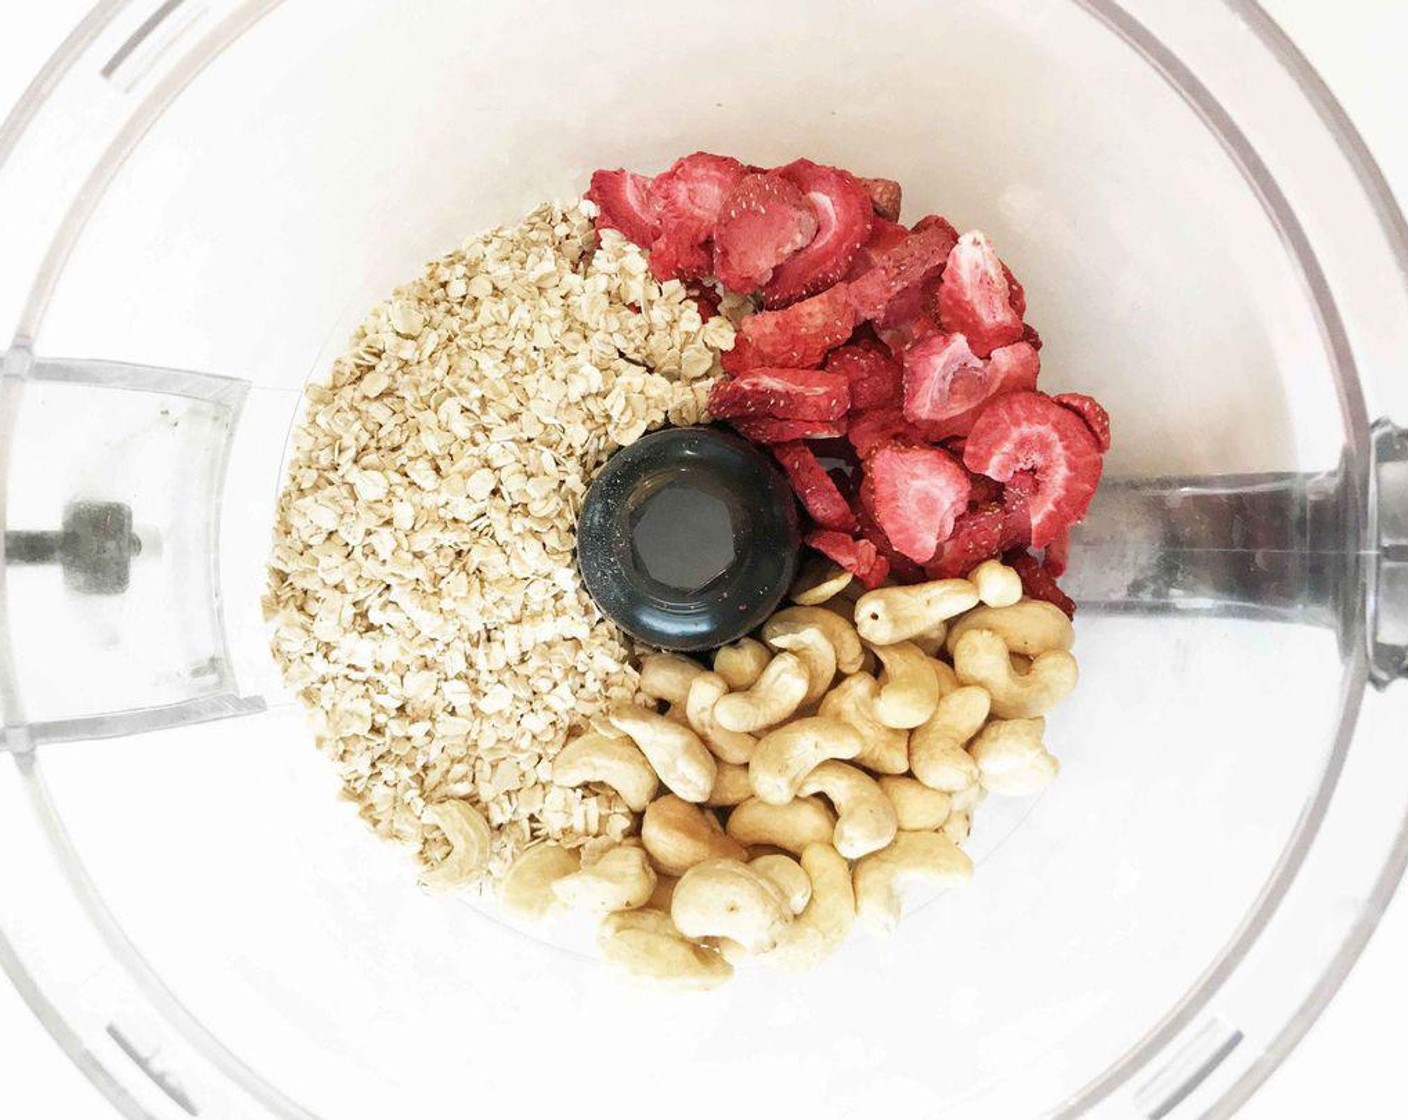 step 1 Place the Freeze Dried Strawberries (1 cup) Raw Cashews (1 cup) and Quick Cooking Oats (1 1/2 cups) into a food processor or blender.